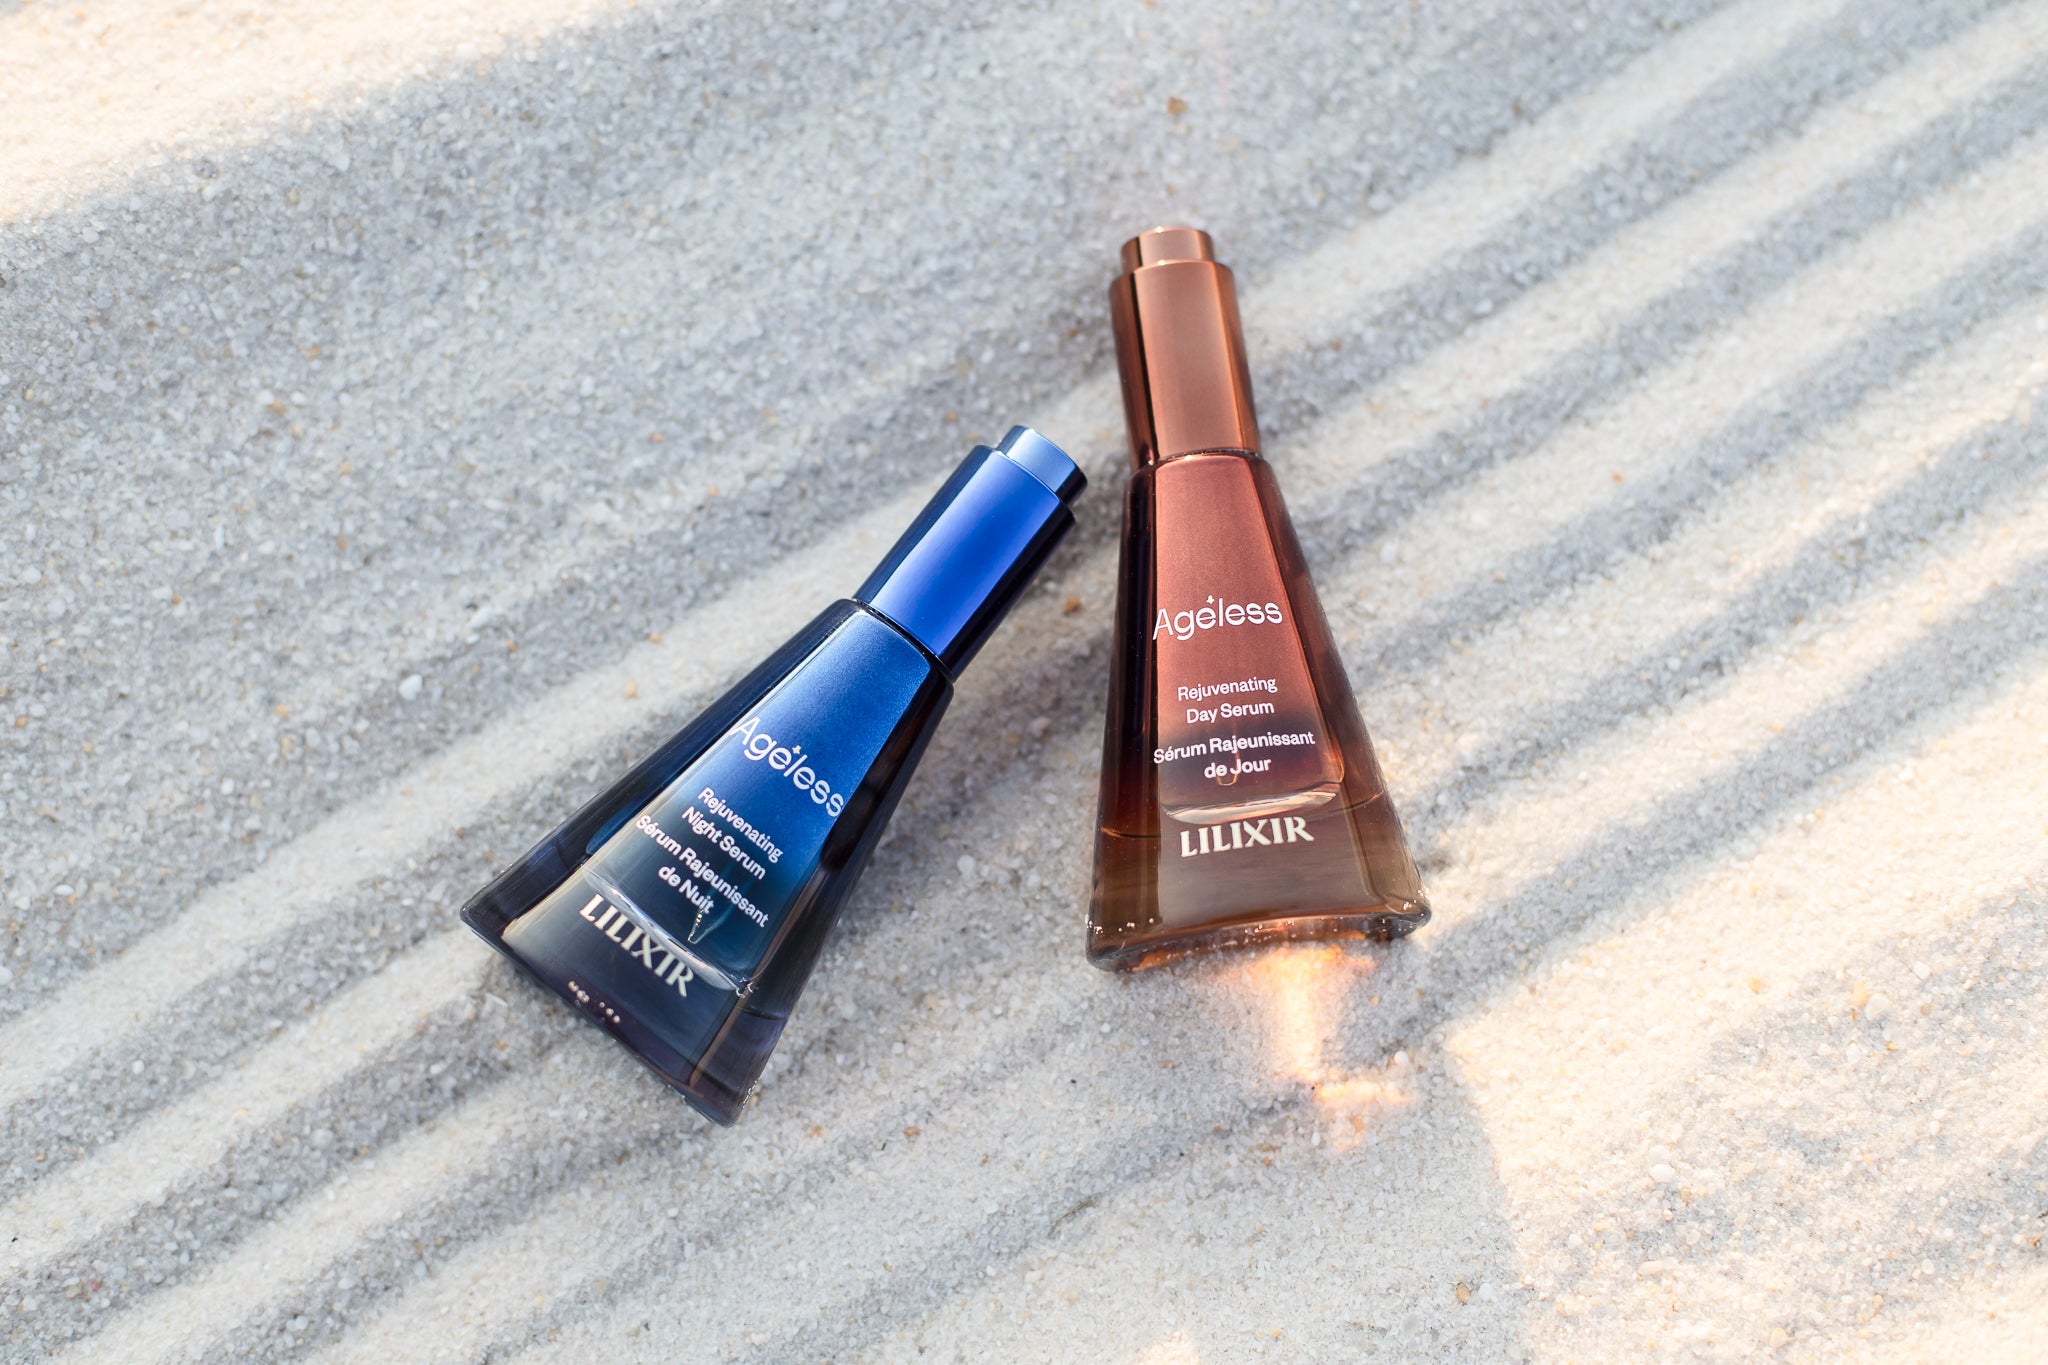 LILIXIR_Ageless_Collection_Rejuvenating_Day_and_Night_Serums on sand